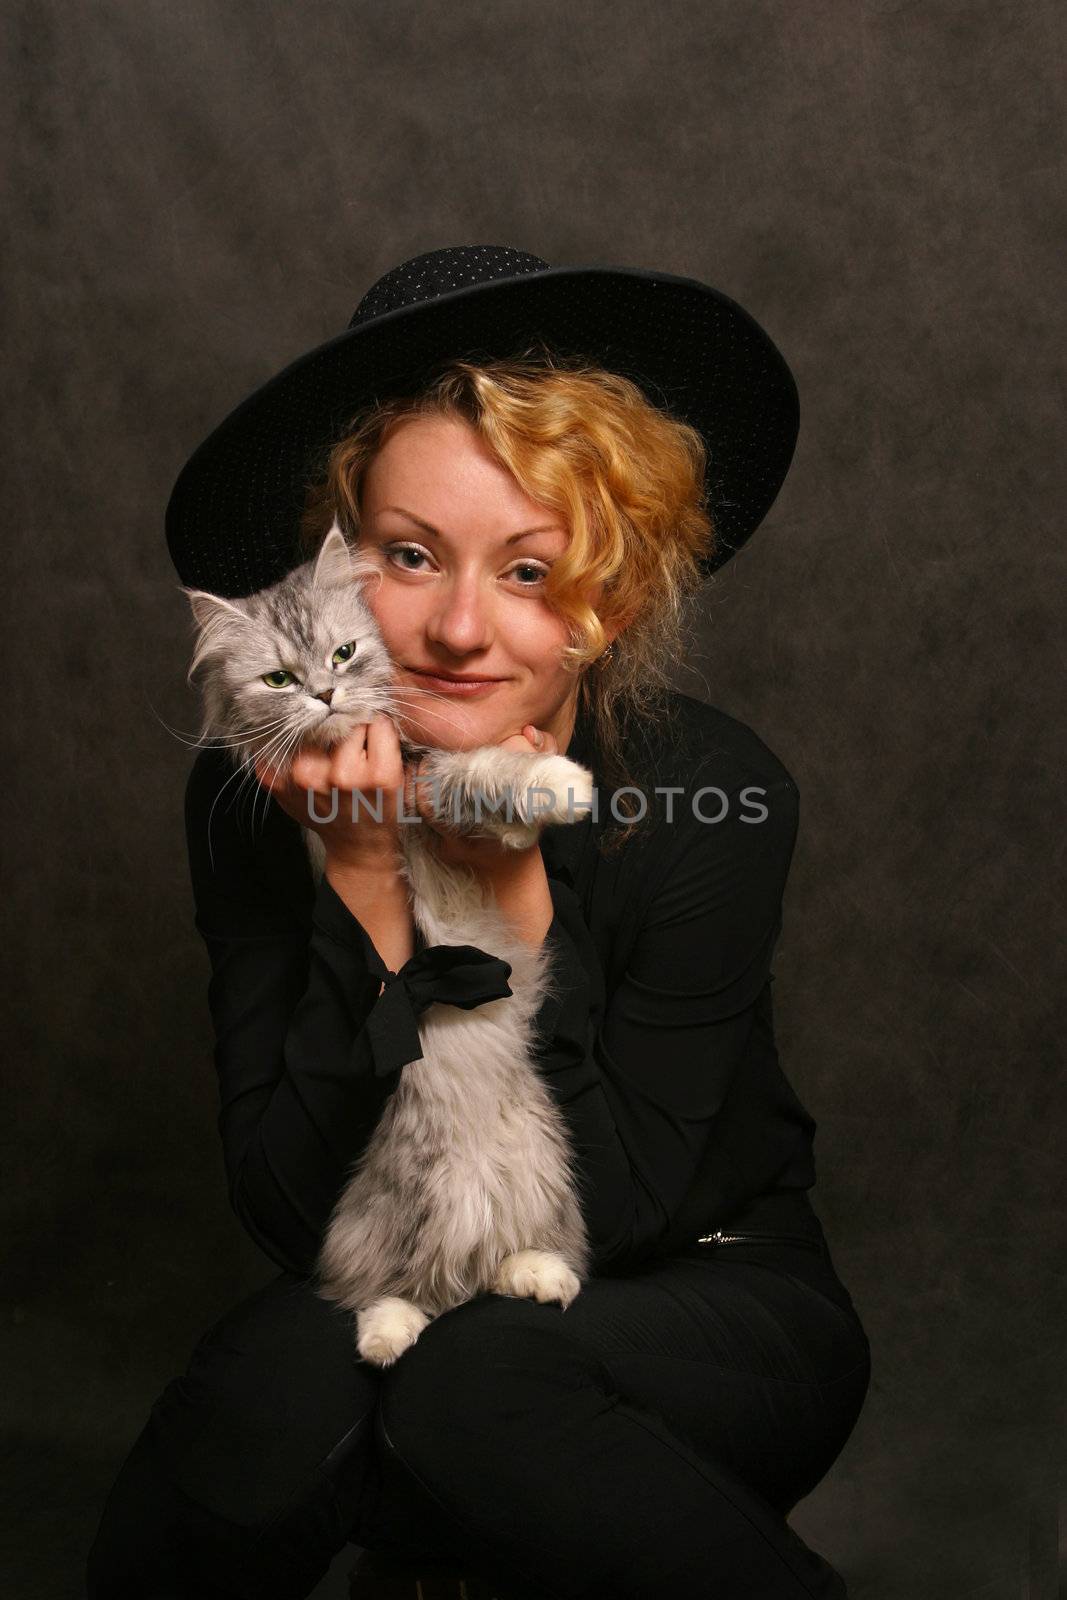 The beautiful girl in a black hat covers a kitten